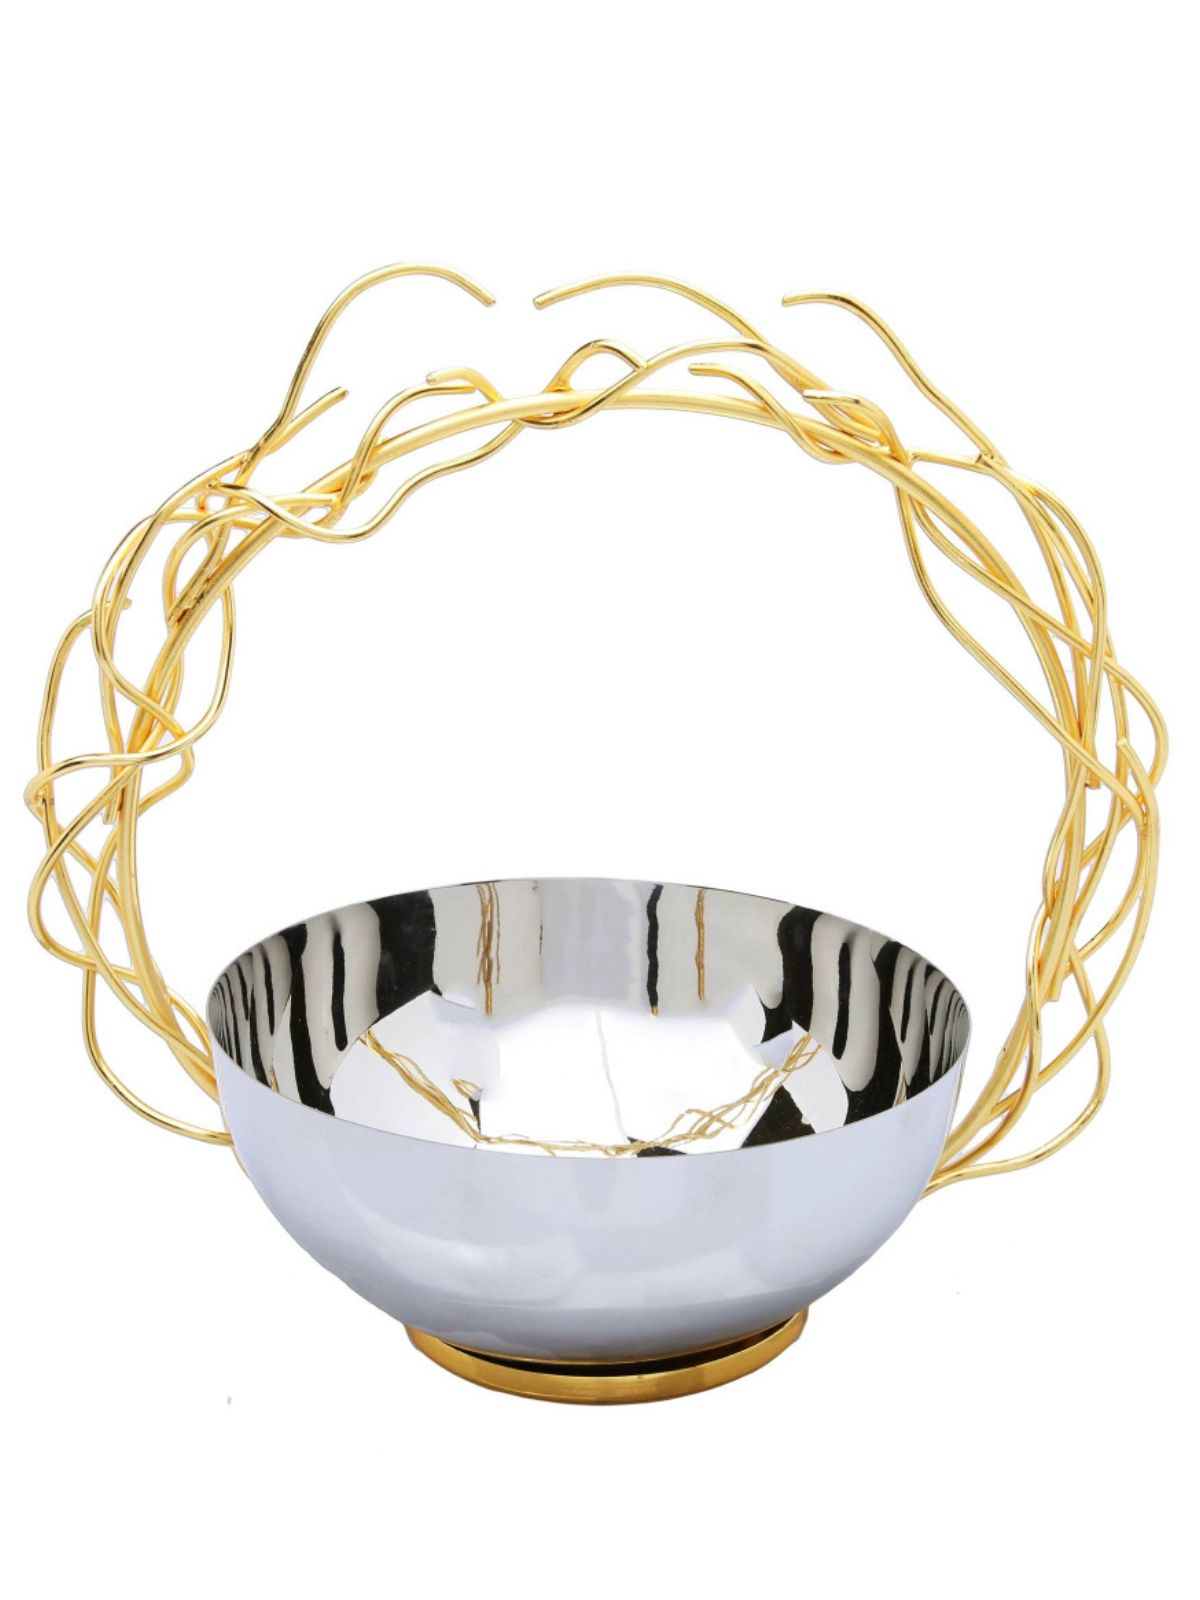 Stainless Steel Decorative Bowl with Gold Twig Handle, 7D x 10H. Sold by KYA Home Decor.